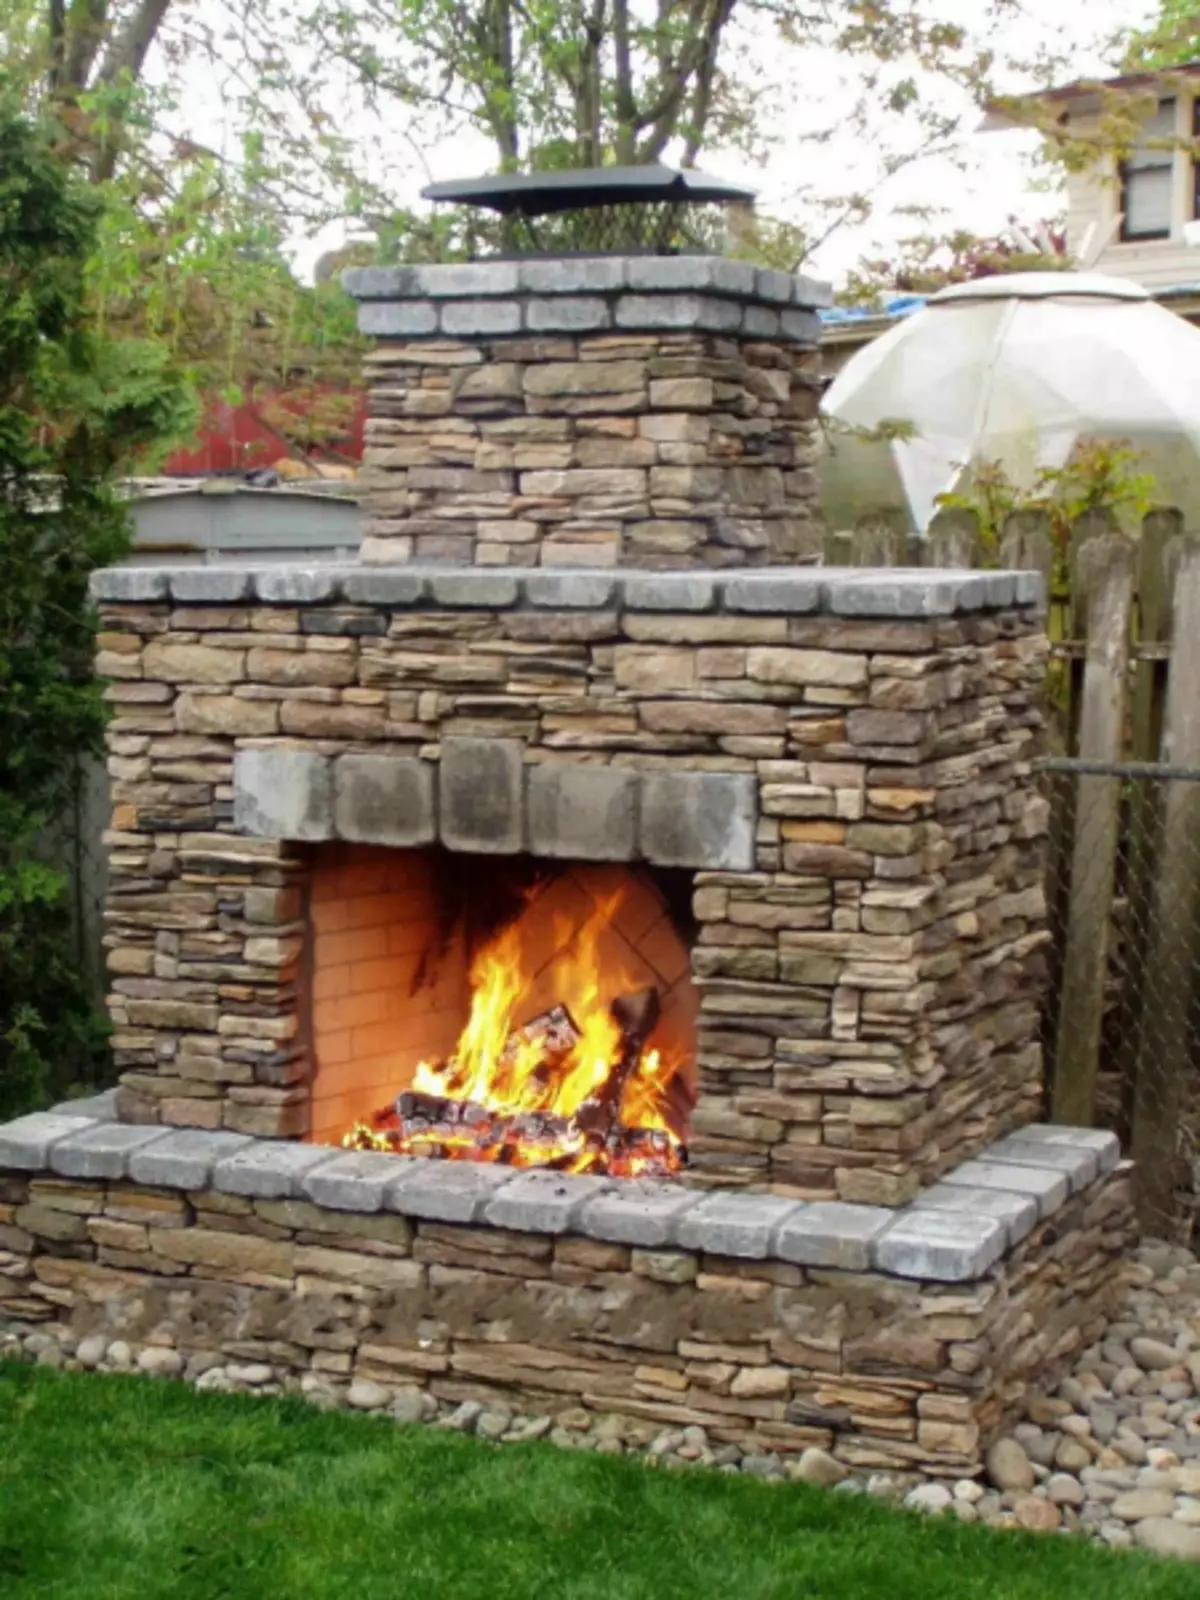 Fireplace on the street with their own hands: oven, brazier and barbecue (60 photos)